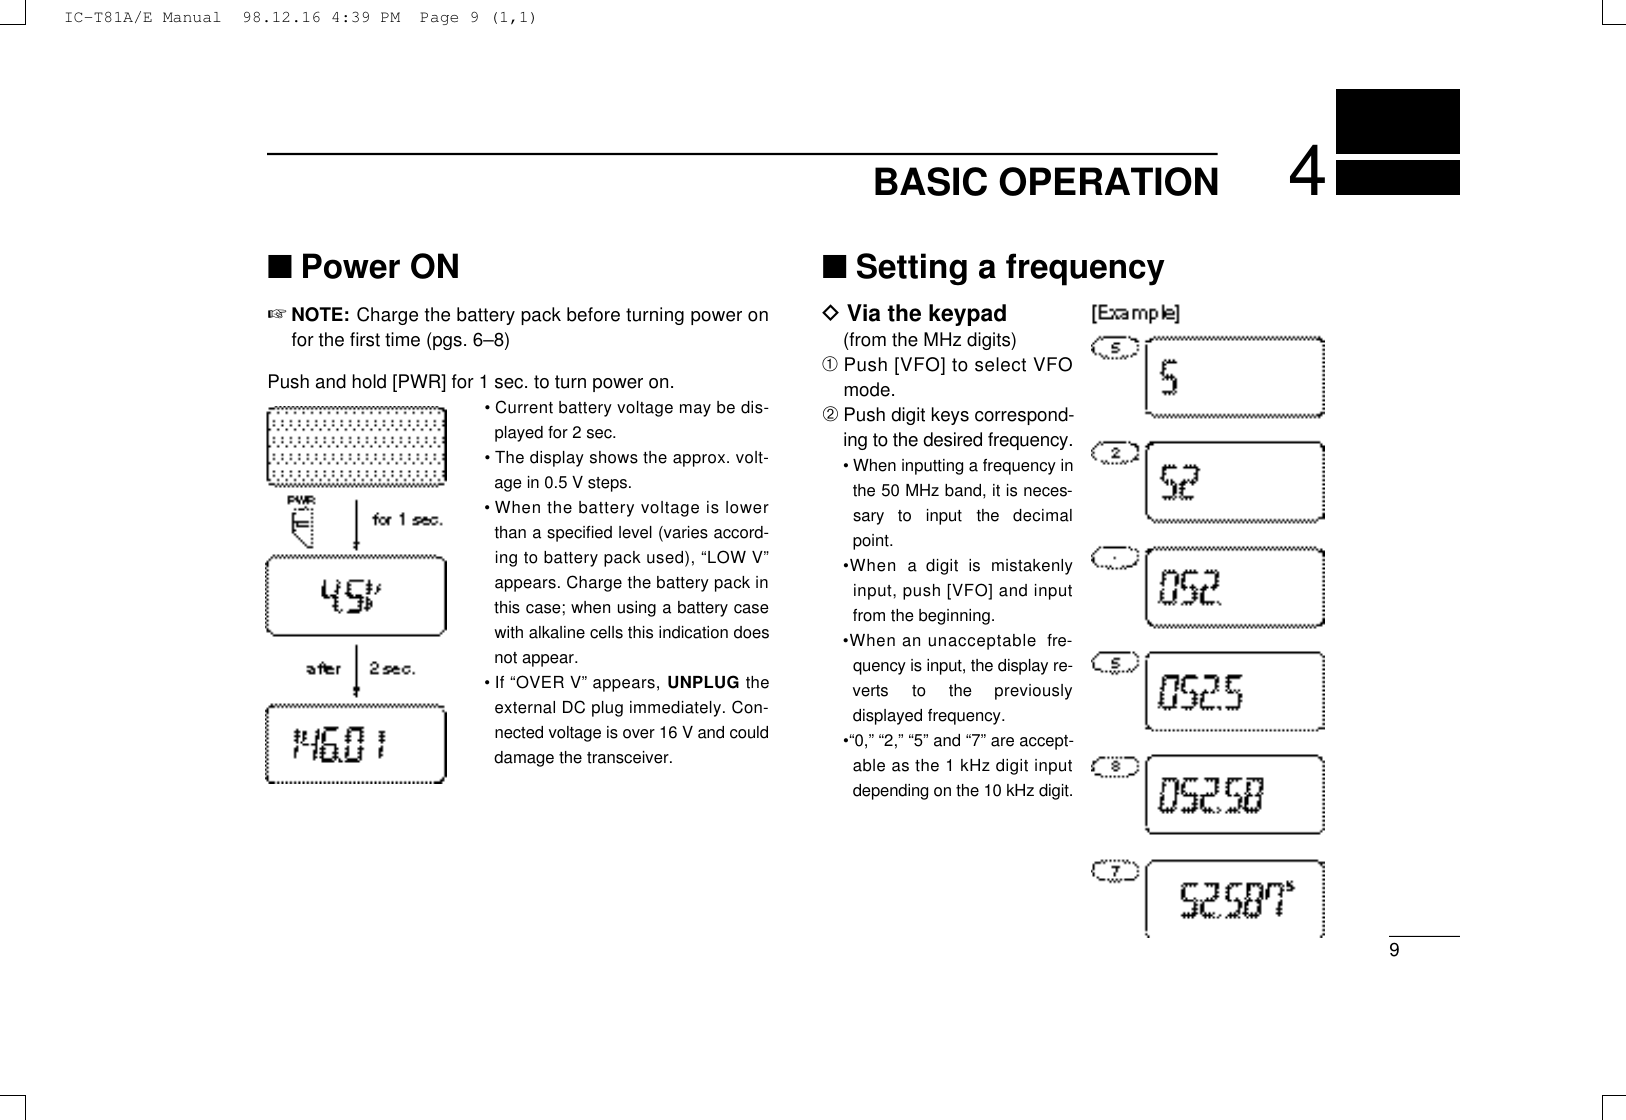 94BASIC OPERATION■Power ON☞NOTE: Charge the battery pack before turning power onfor the ﬁrst time (pgs. 6–8)Push and hold [PWR] for 1 sec. to turn power on.•Current battery voltage may be dis-played for 2 sec.•The display shows the approx. volt-age in 0.5 V steps.•When the battery voltage is lowerthan a speciﬁed level (varies accord-ing to battery pack used), “LOW V ”appears. Charge the battery pack inthis case; when using a battery casewith alkaline cells this indication doesnot appear.•If “OVER V” appears, U N P L U G t h eexternal DC plug immediately. Con-nected voltage is over 16 V and coulddamage the transceiver.■Setting a frequencyDVia the keypad(from the MHz digits)➀Push [VFO] to select VFOmode.➁Push digit keys correspond-ing to the desired frequency.•When inputting a frequency inthe 50 MHz band, it is neces-sary  to  input  the  decimalpoint.•When  a  digit  is  mistakenlyinput, push [VFO] and inputfrom the beginning.•When an unacceptable  fre-quency is input, the display re-verts  to  the  previouslydisplayed frequency.•“0,” “2,” “5” and “7” are accept-able as the 1 kHz digit inputdepending on the 10 kHz digit.IC-T81A/E Manual  98.12.16 4:39 PM  Page 9 (1,1)